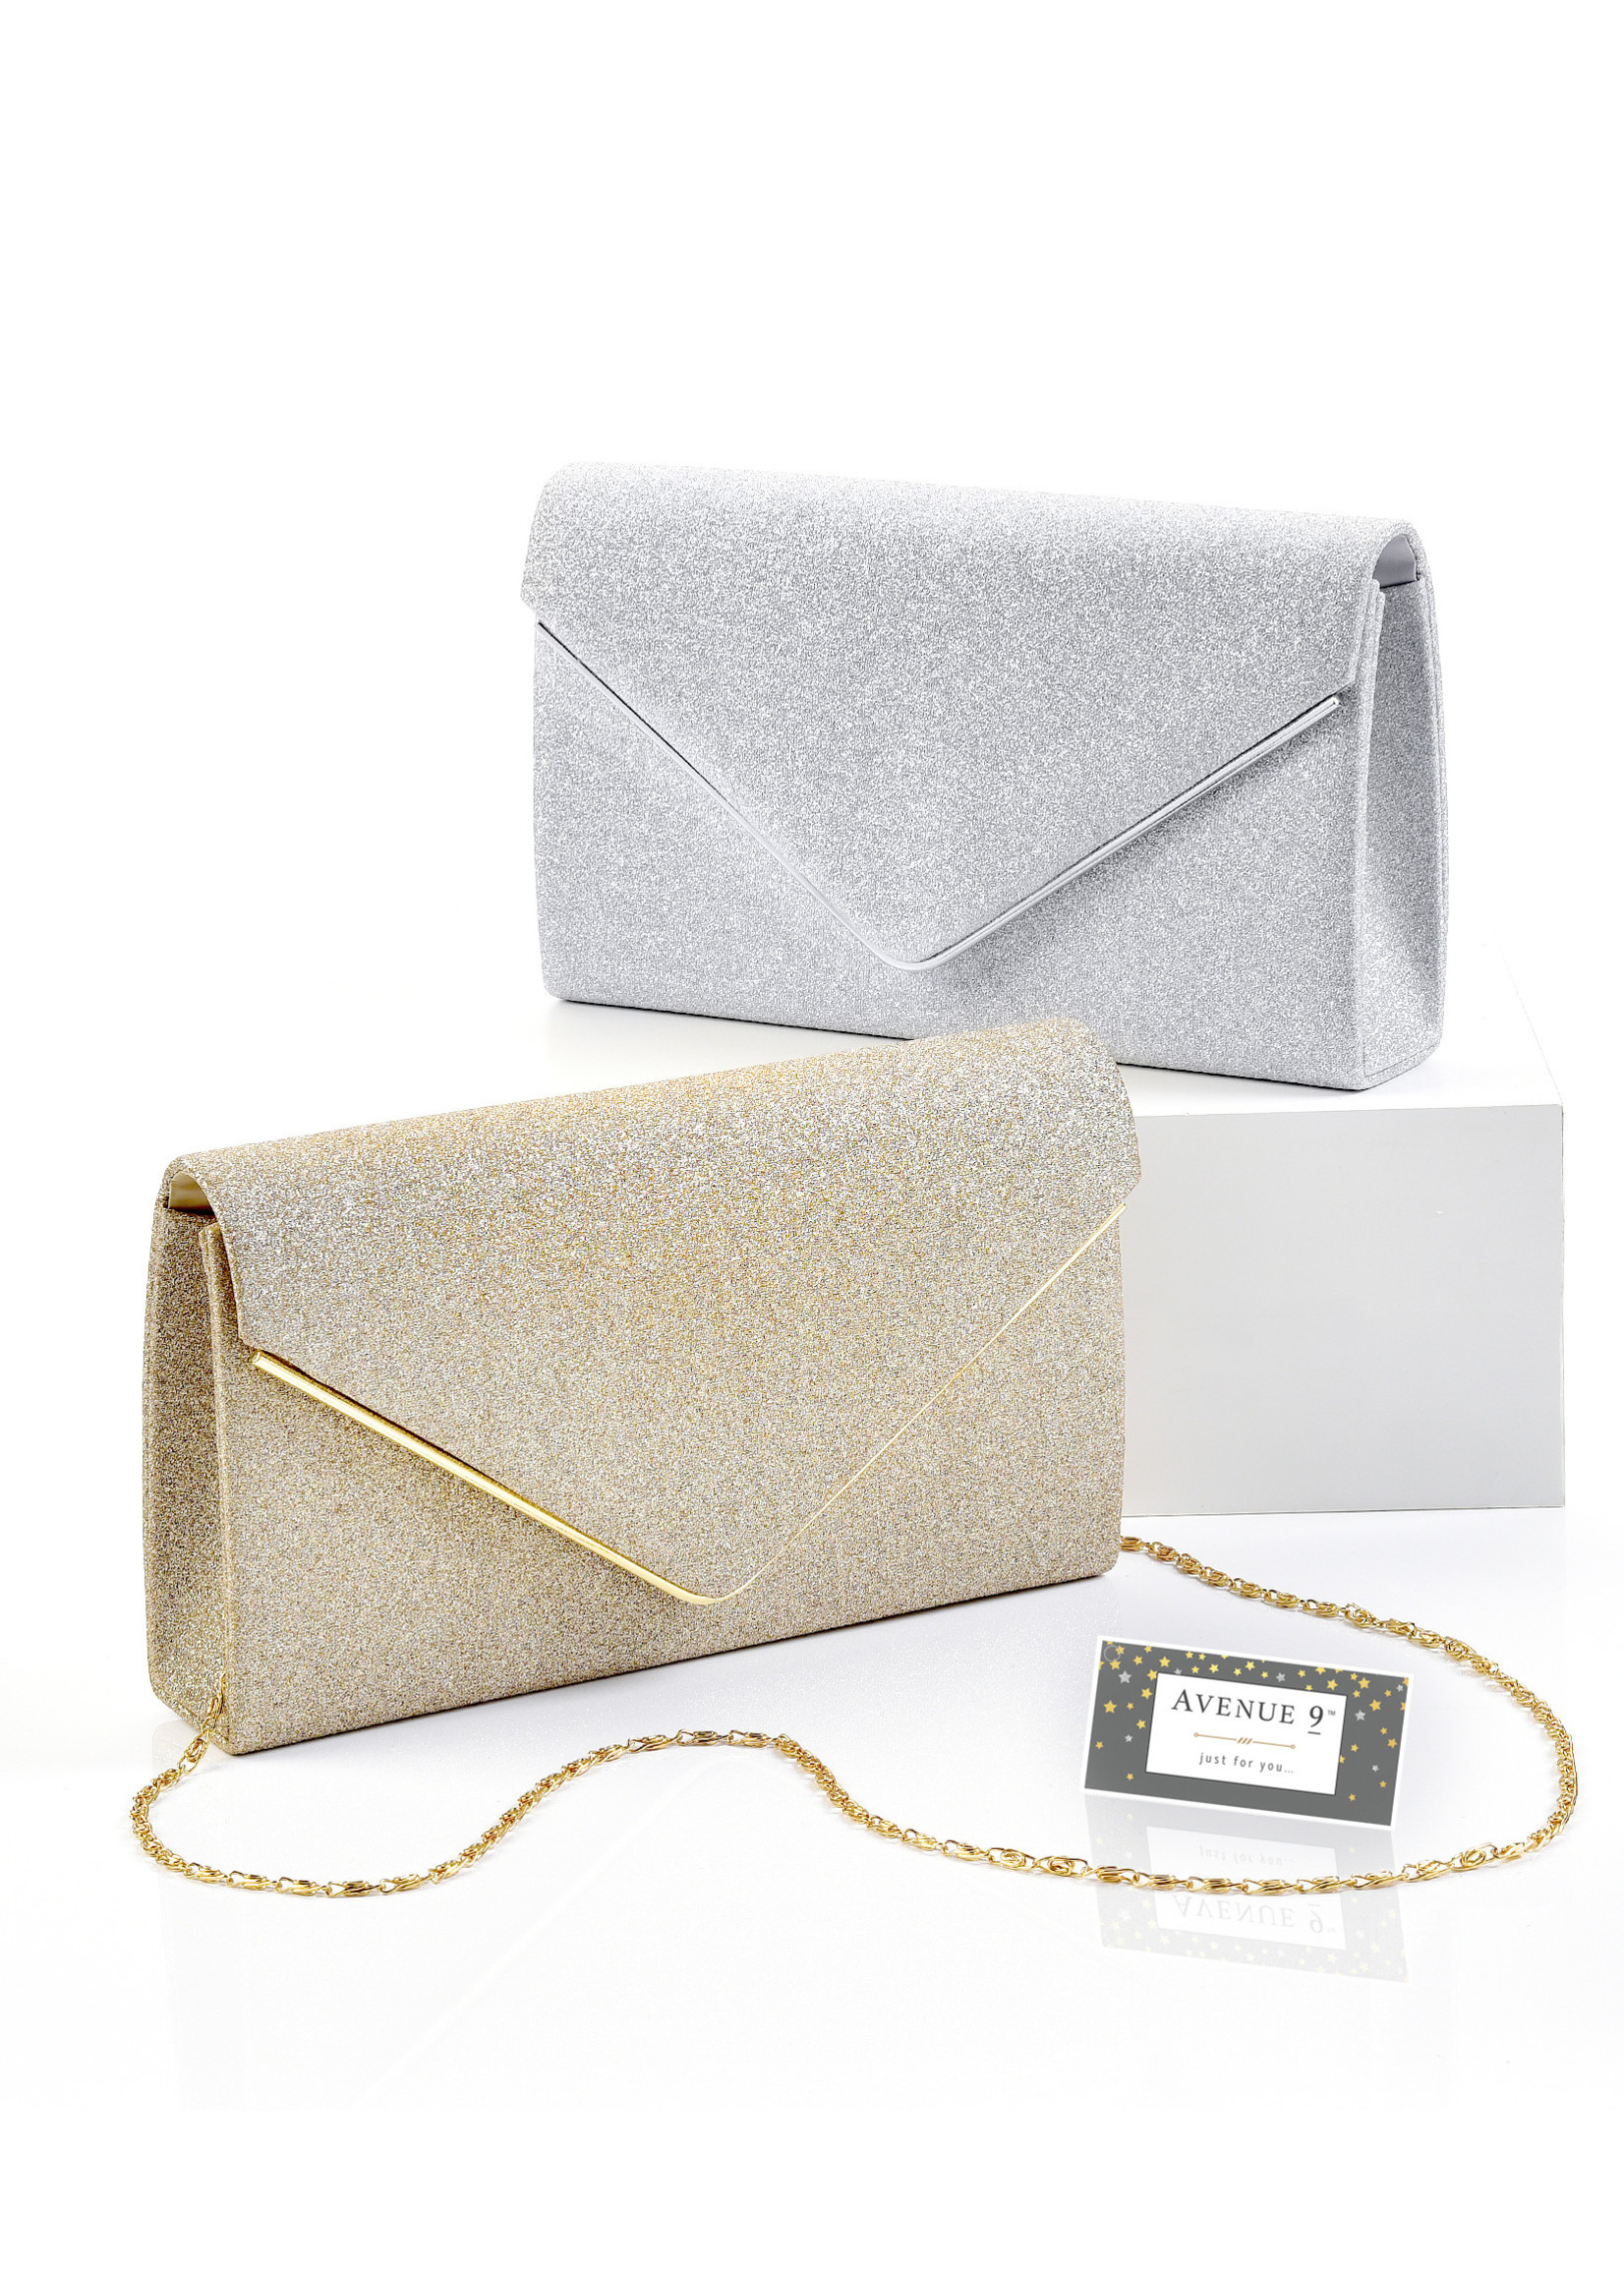 Giftcraft Glittered Polyester Evening Bag Silver